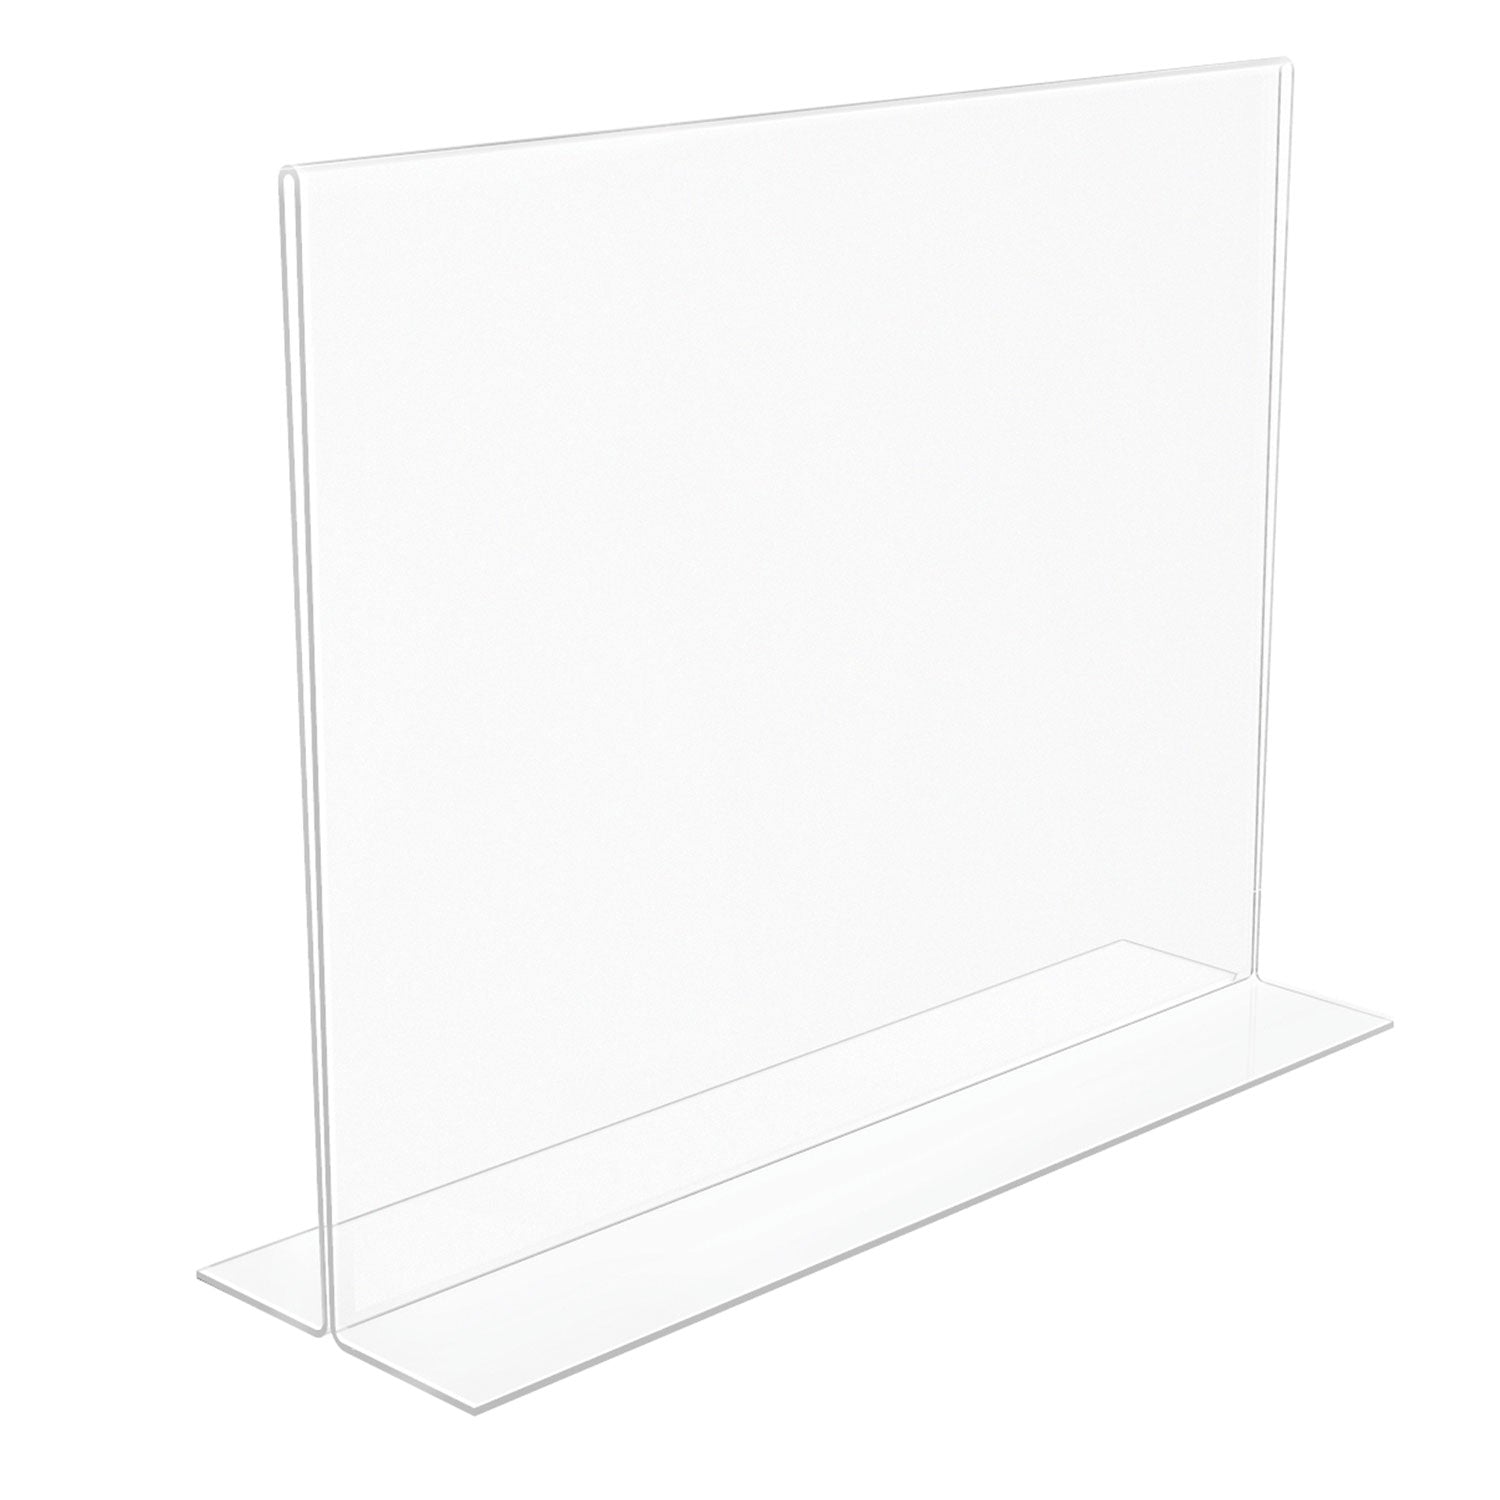 Anti-Glare Stand Up Double Sided Sign Holder, 8.5 x 11, Clear - 